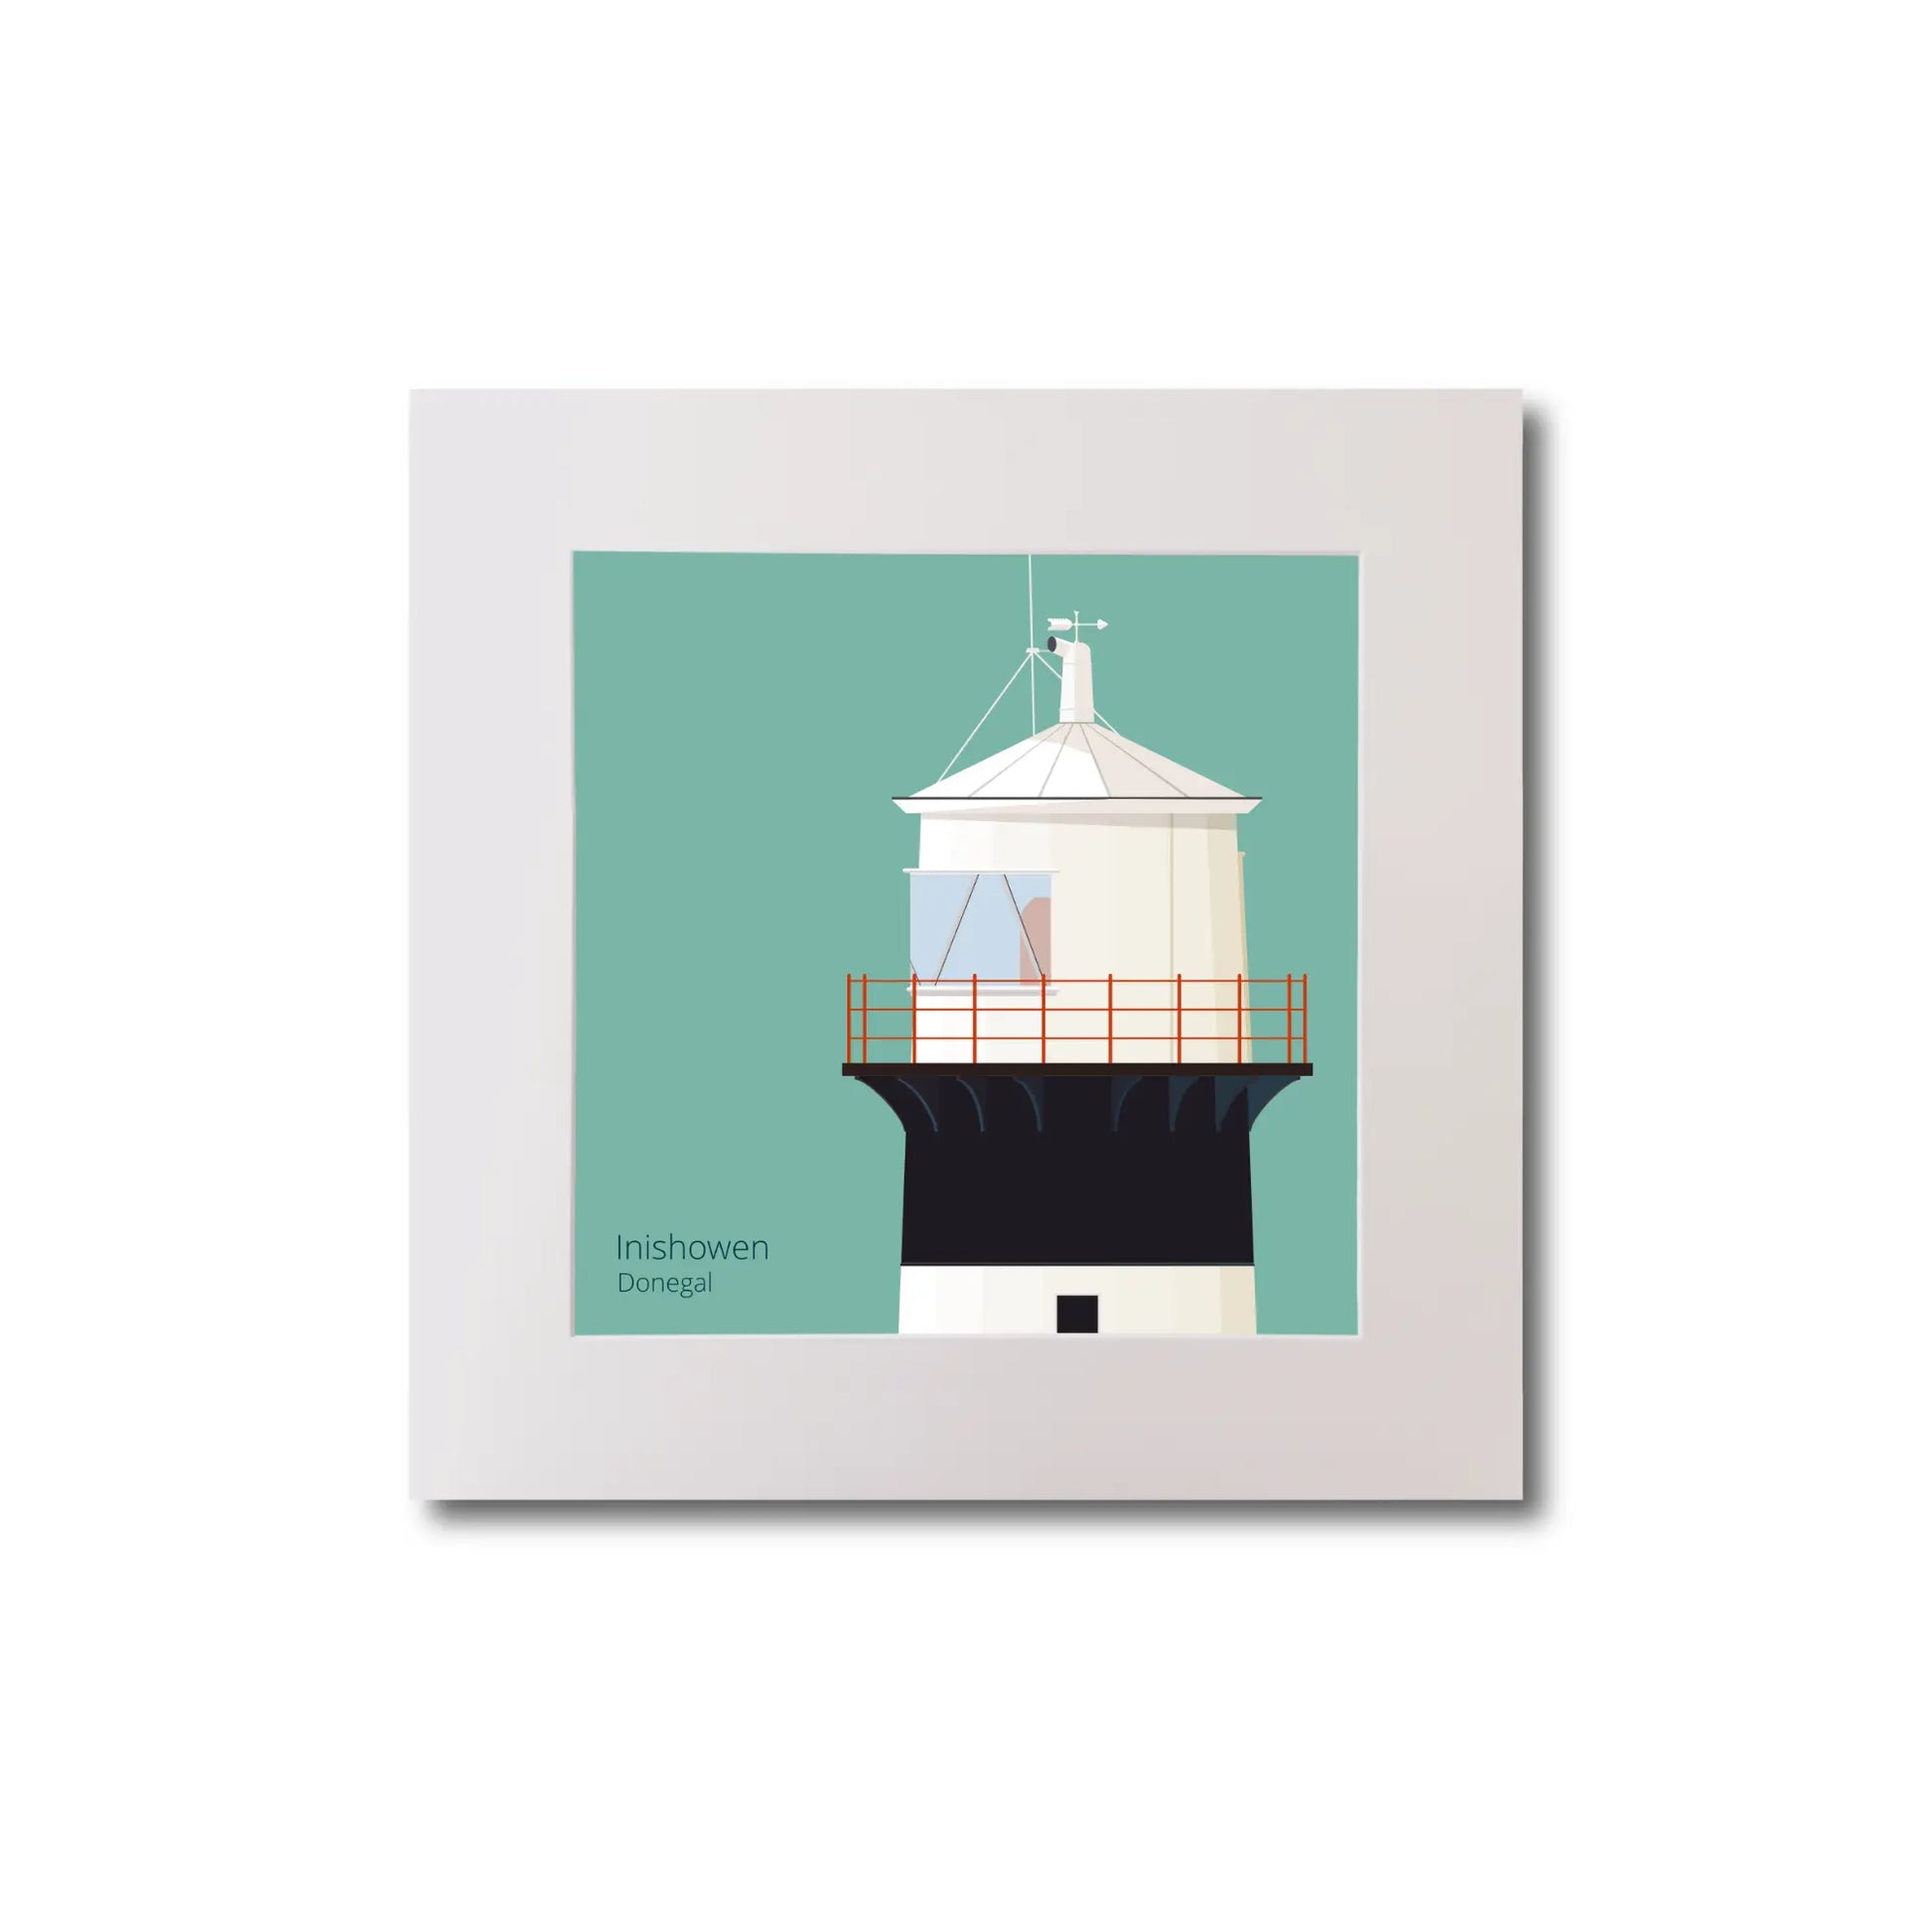 Illustration of inishowen lighthouse on an ocean green background, mounted and measuring 20x20cm.